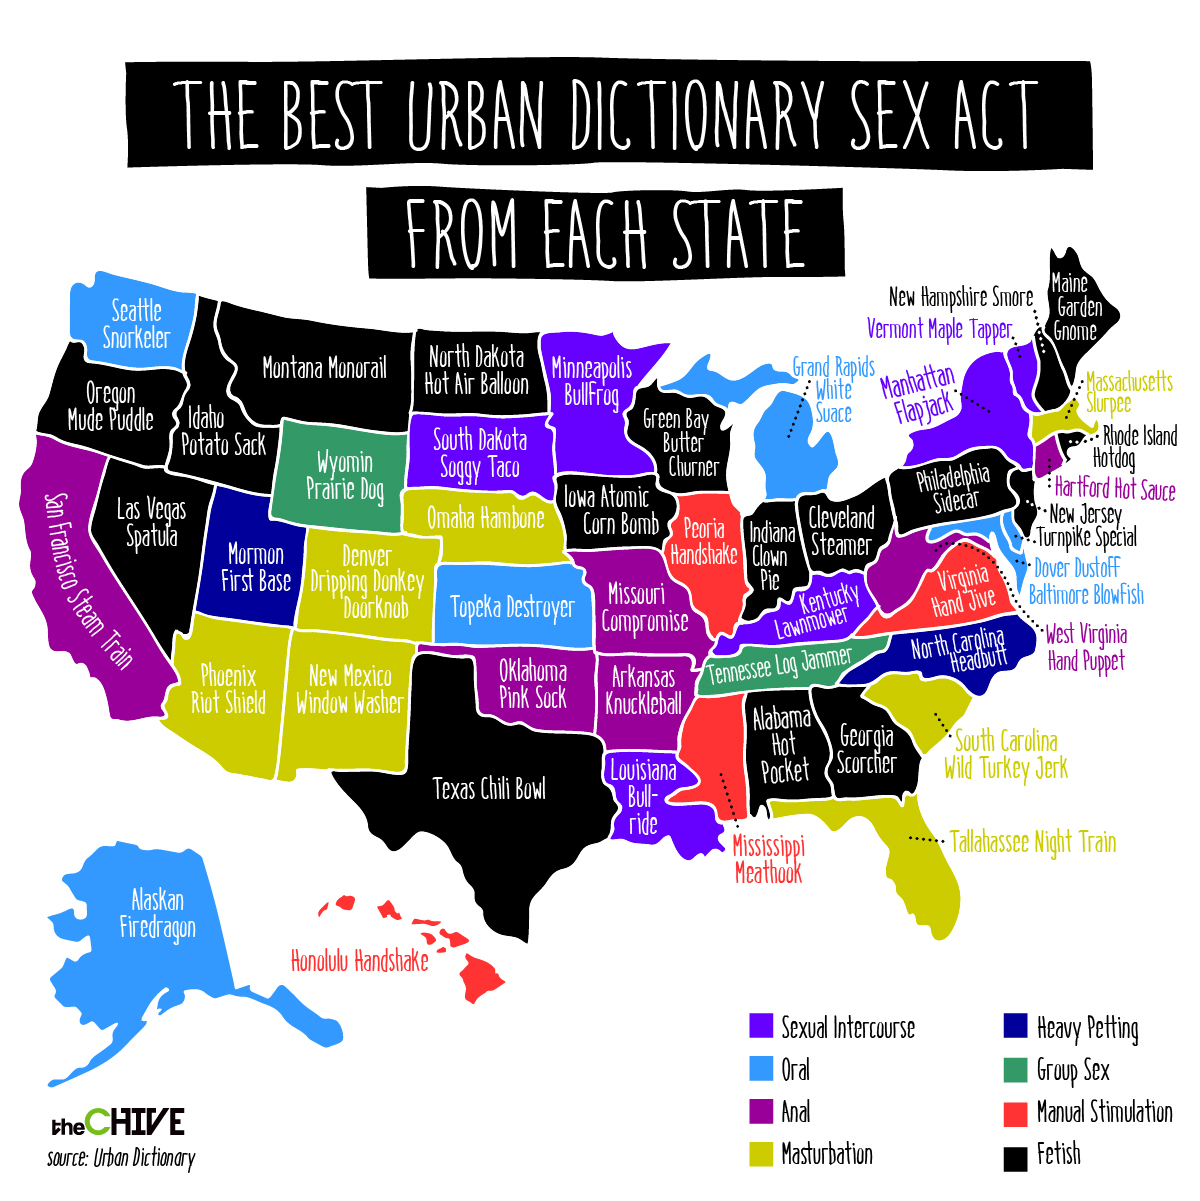 Heres The “Best” Urban Dictionary Sex Act From Each State  image photo pic